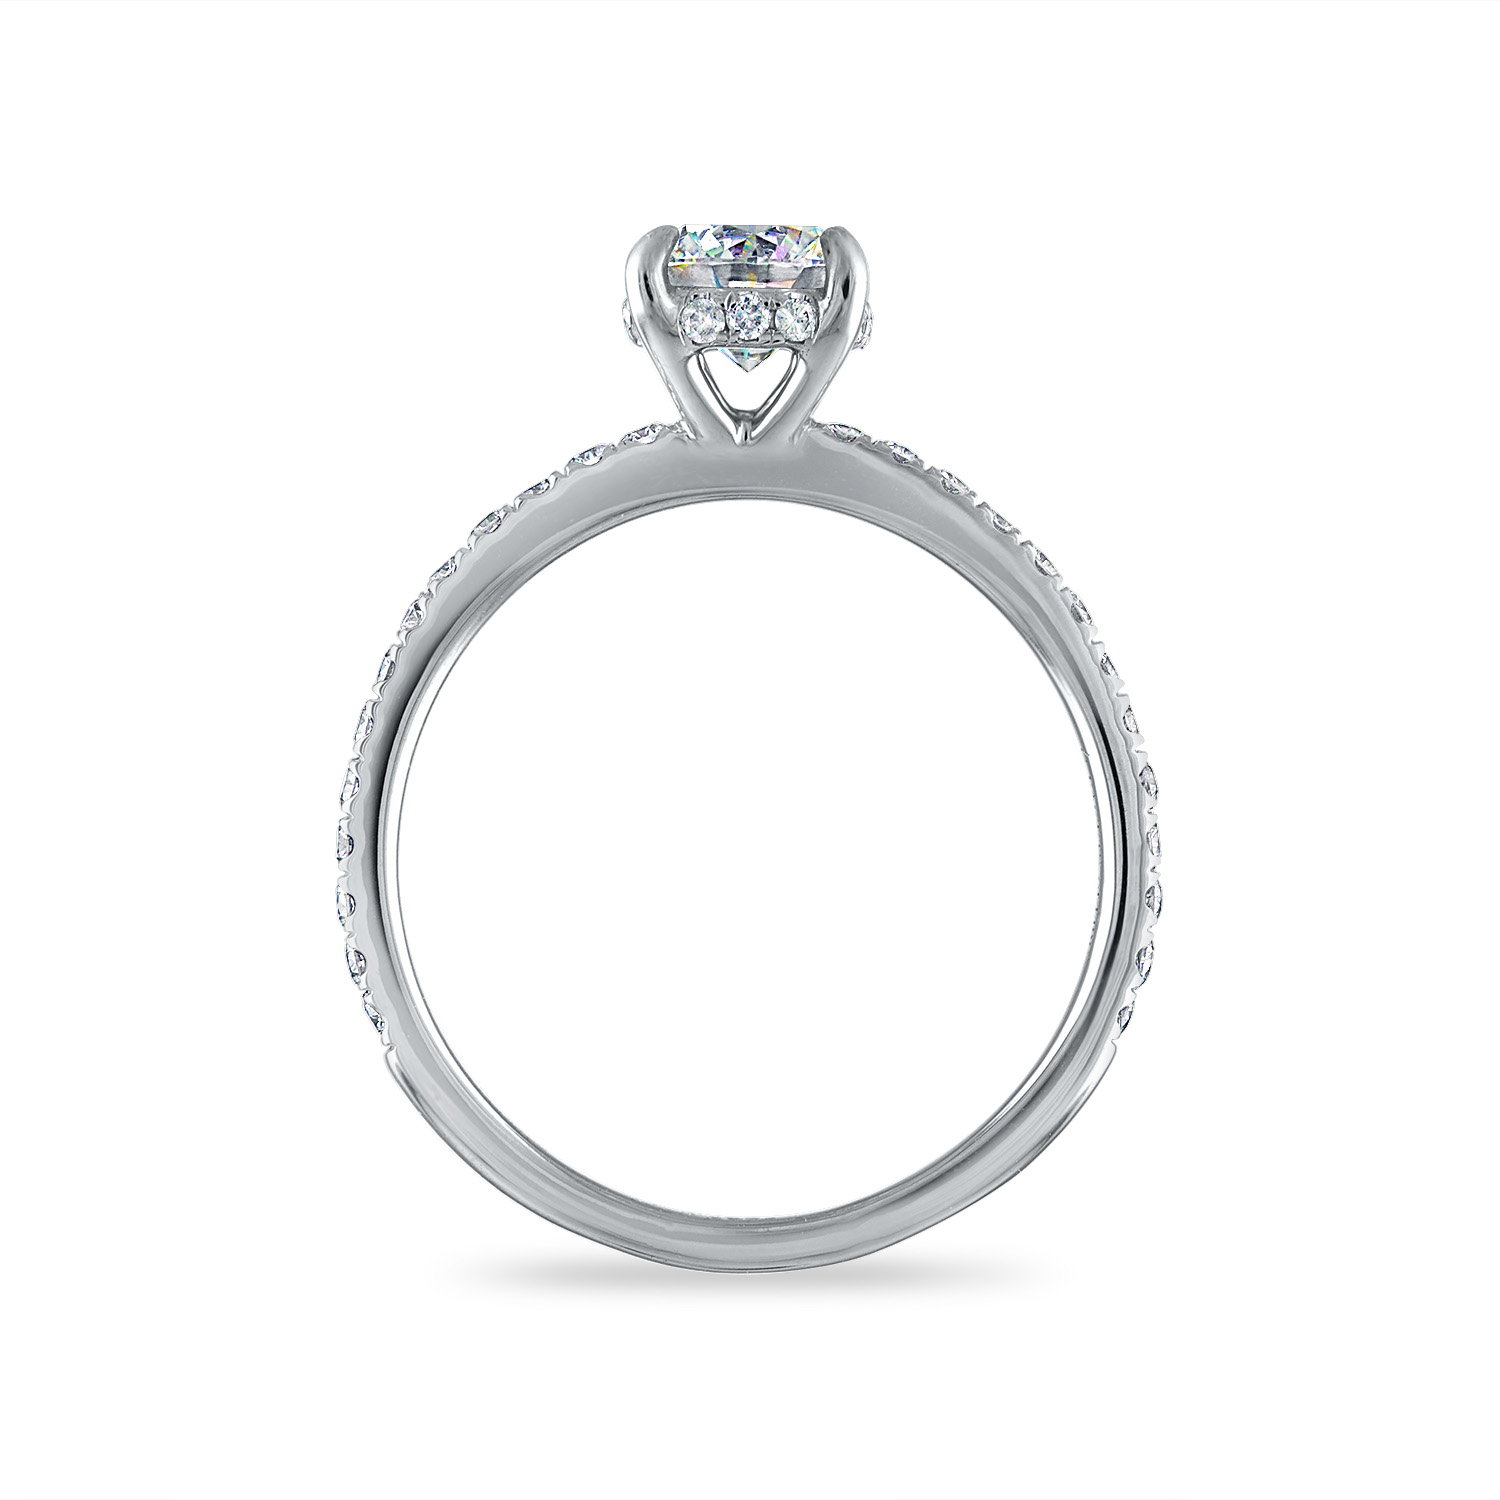 Facets of Fire Diamond Engagement Ring with Hidden Halo